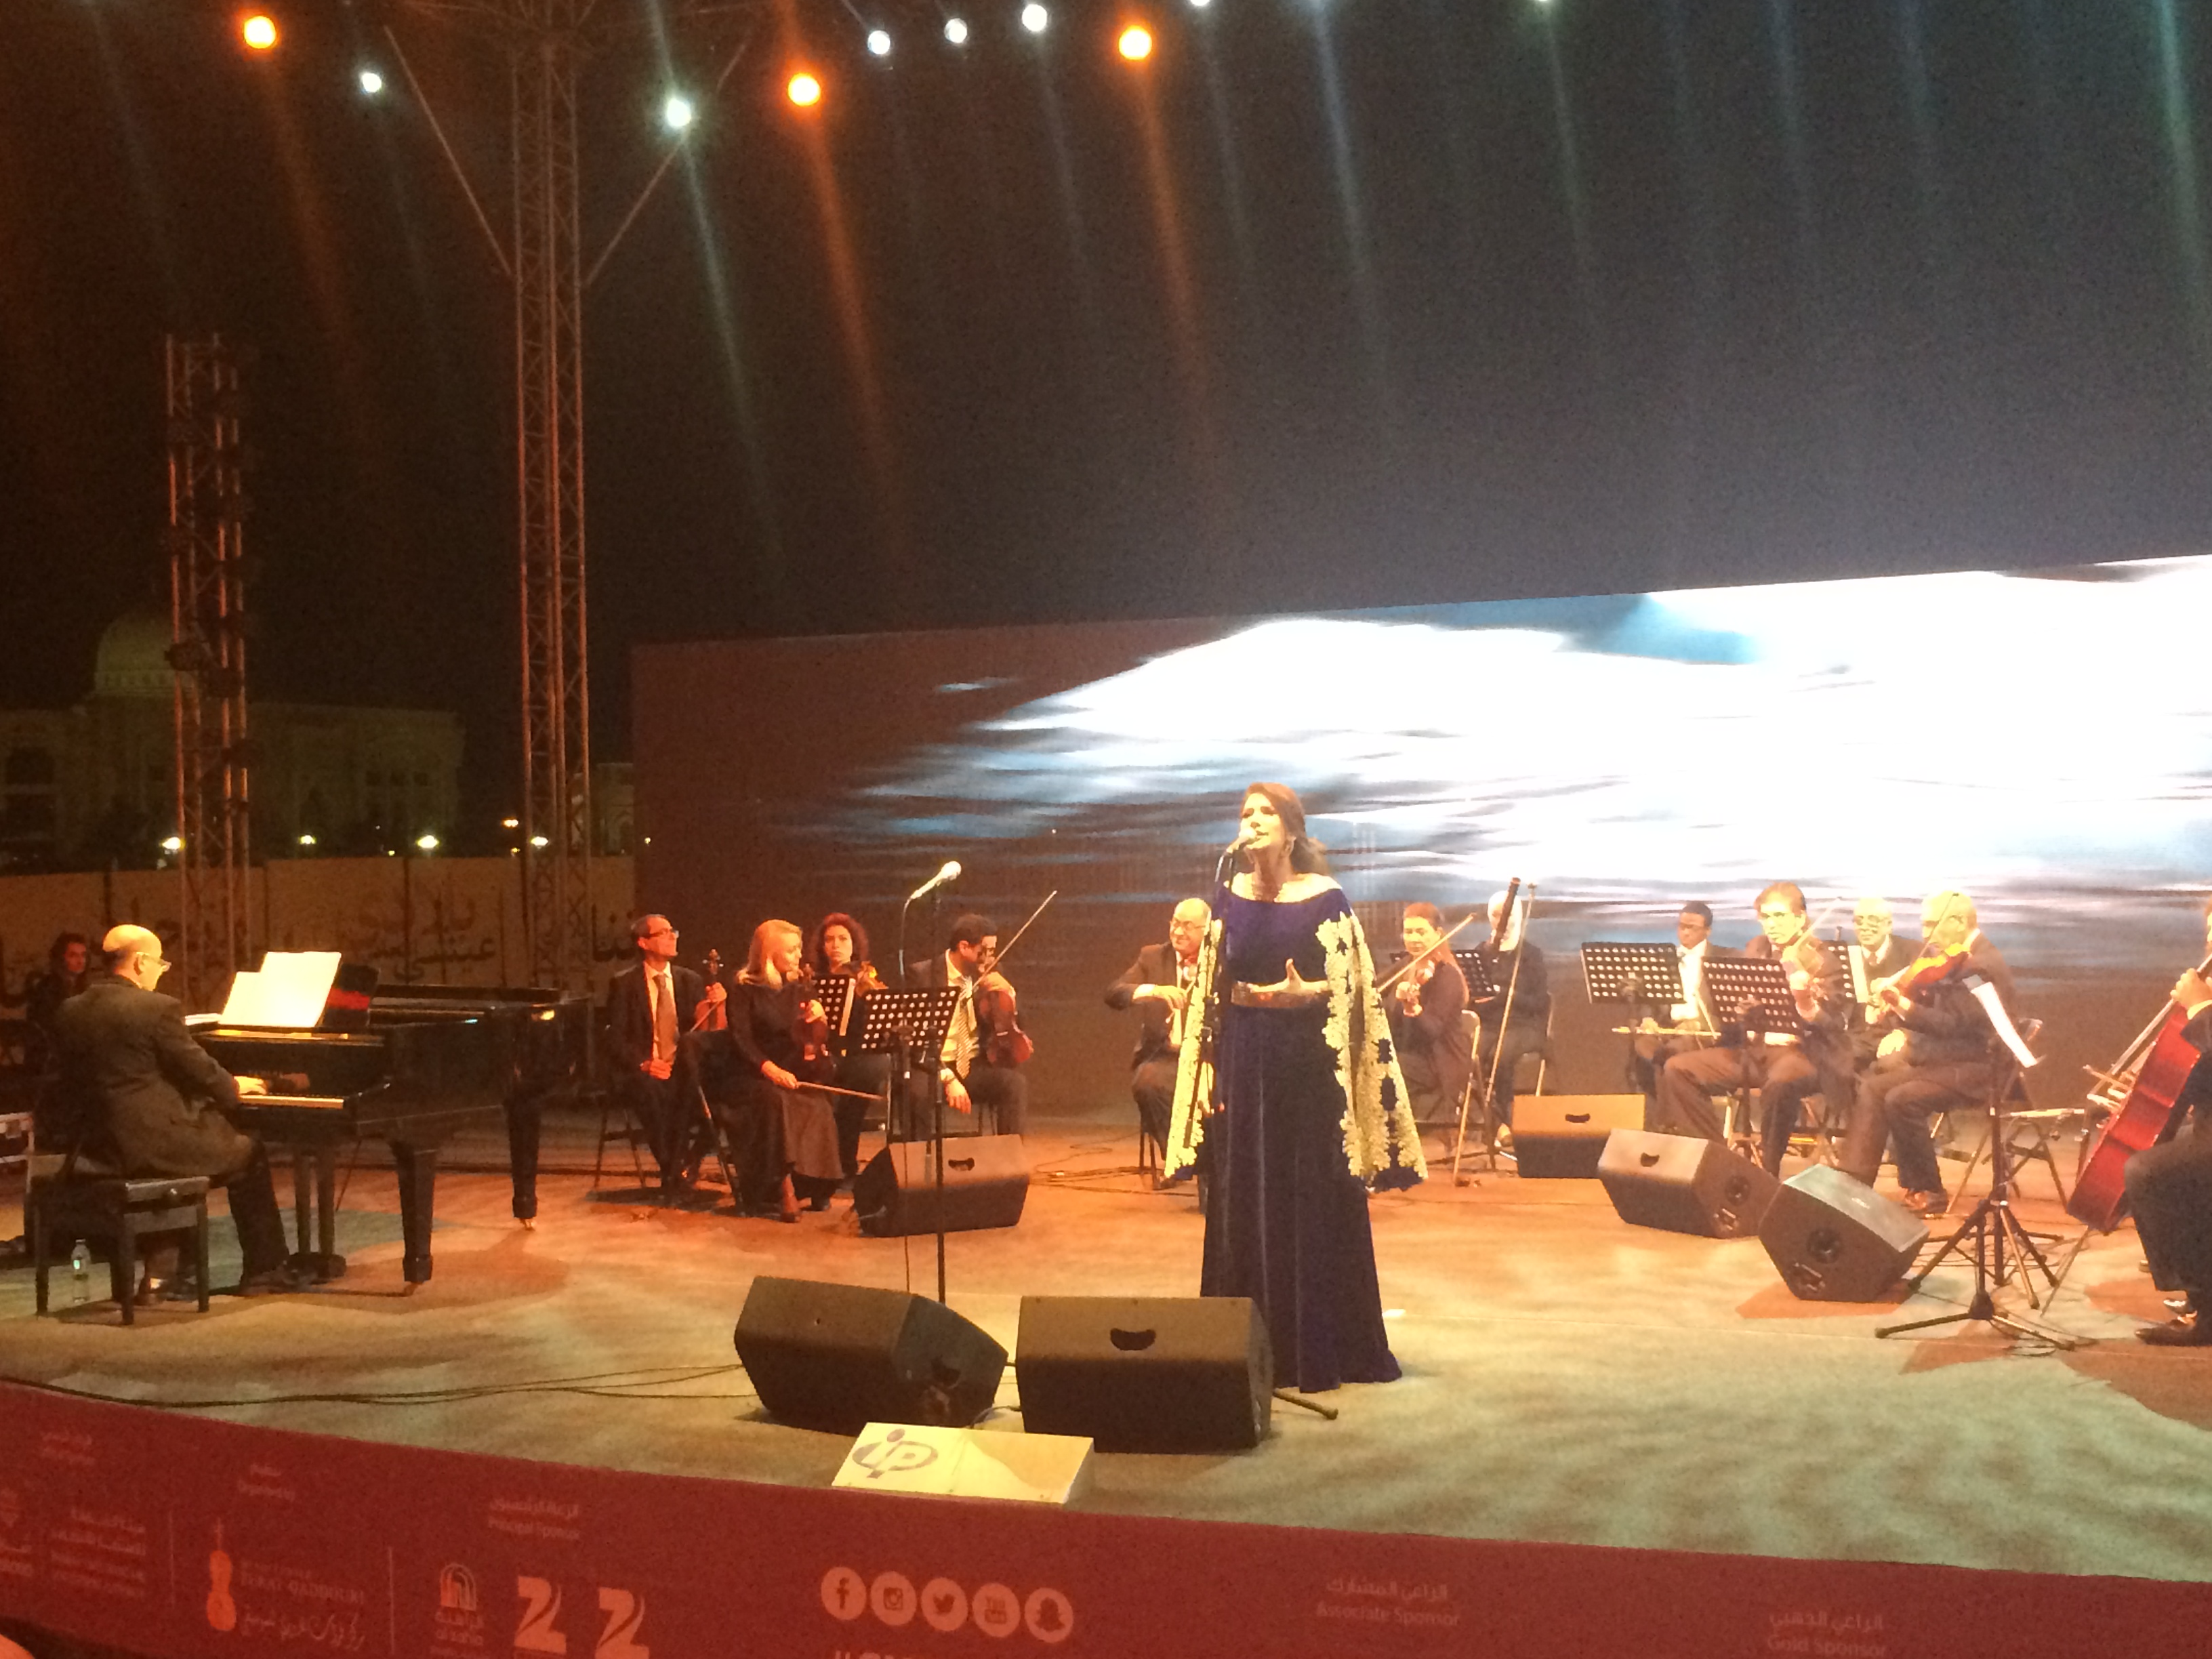 Jordanian National Orchestra Association (JOrchestra) headed by HE Dr. Talal Abu-Ghazaleh participates at the closing night of the third season  of Sharjah World Music Festival  at Al Alam Island in the UAE  